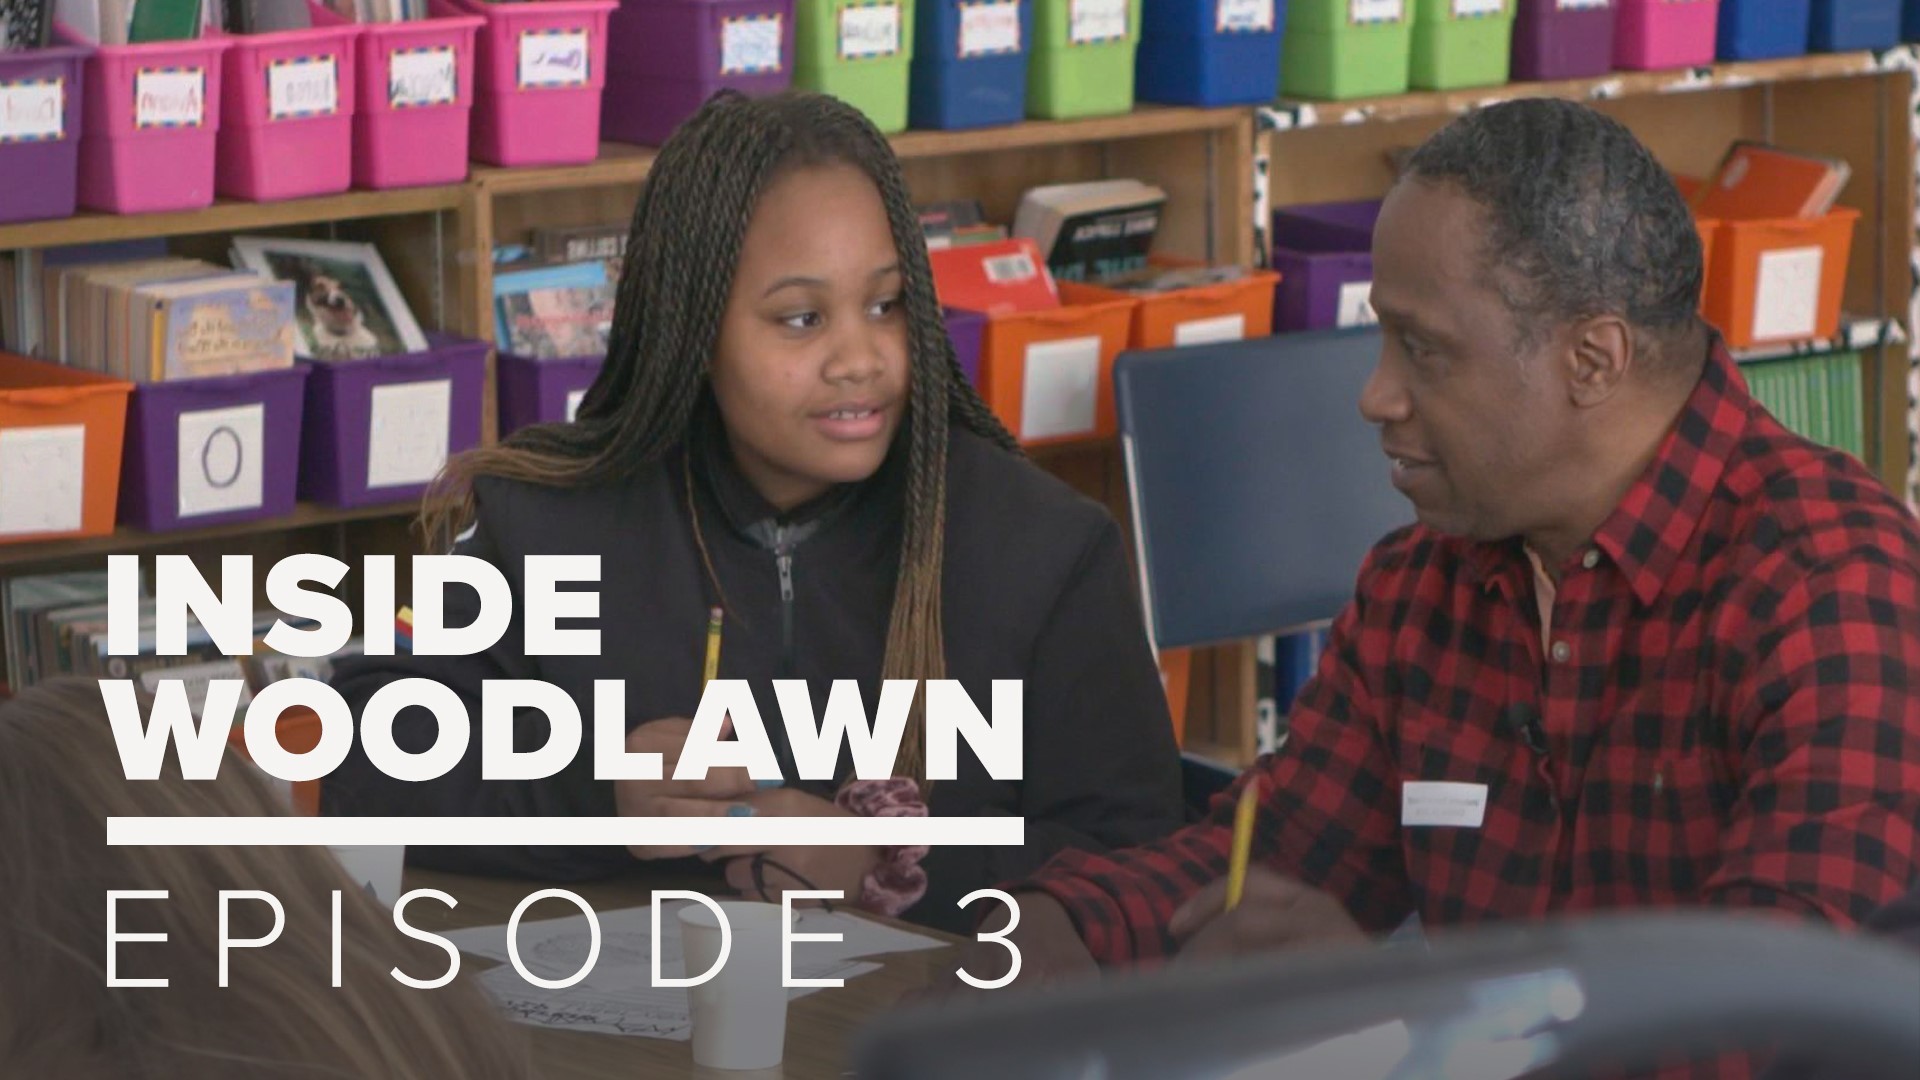 More than half of the students at Woodlawn Elementary don't live in the neighborhood because their families can't afford to rent or own homes there.